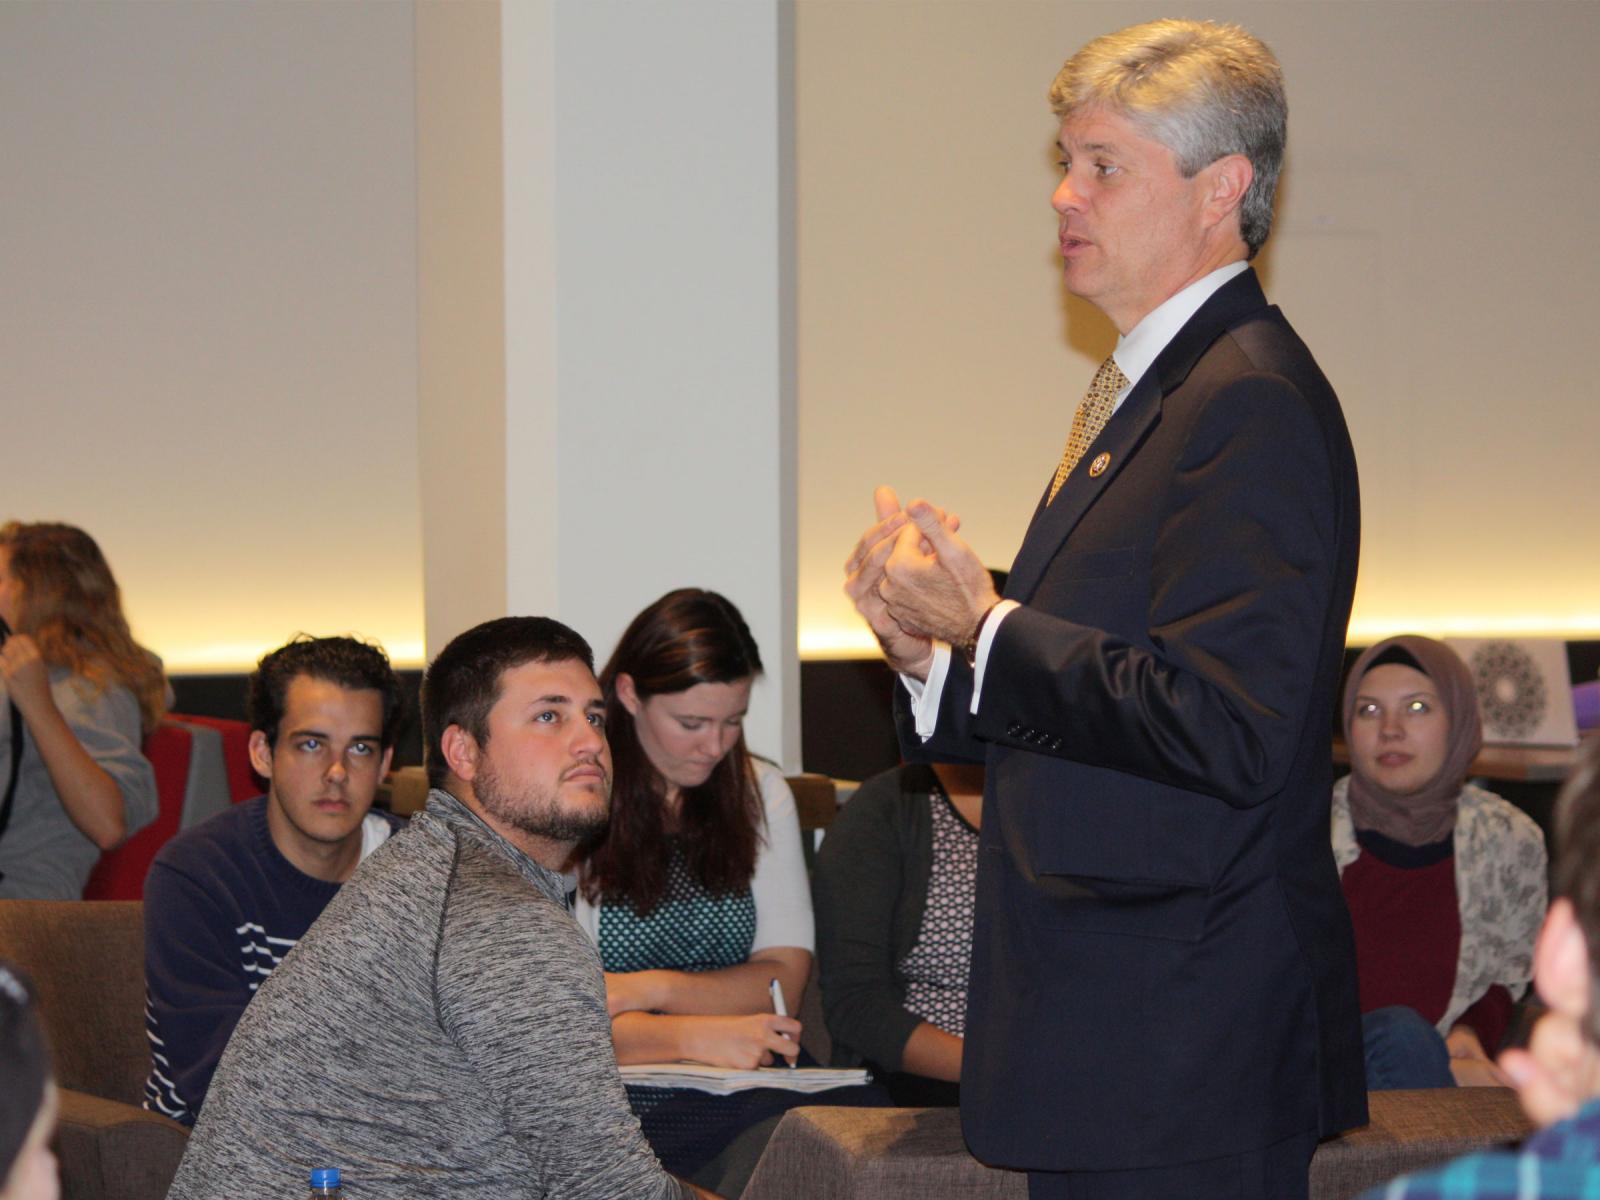 Rep. Jeff Fortenberry discusses the ideals of democracy with Nebraska students.